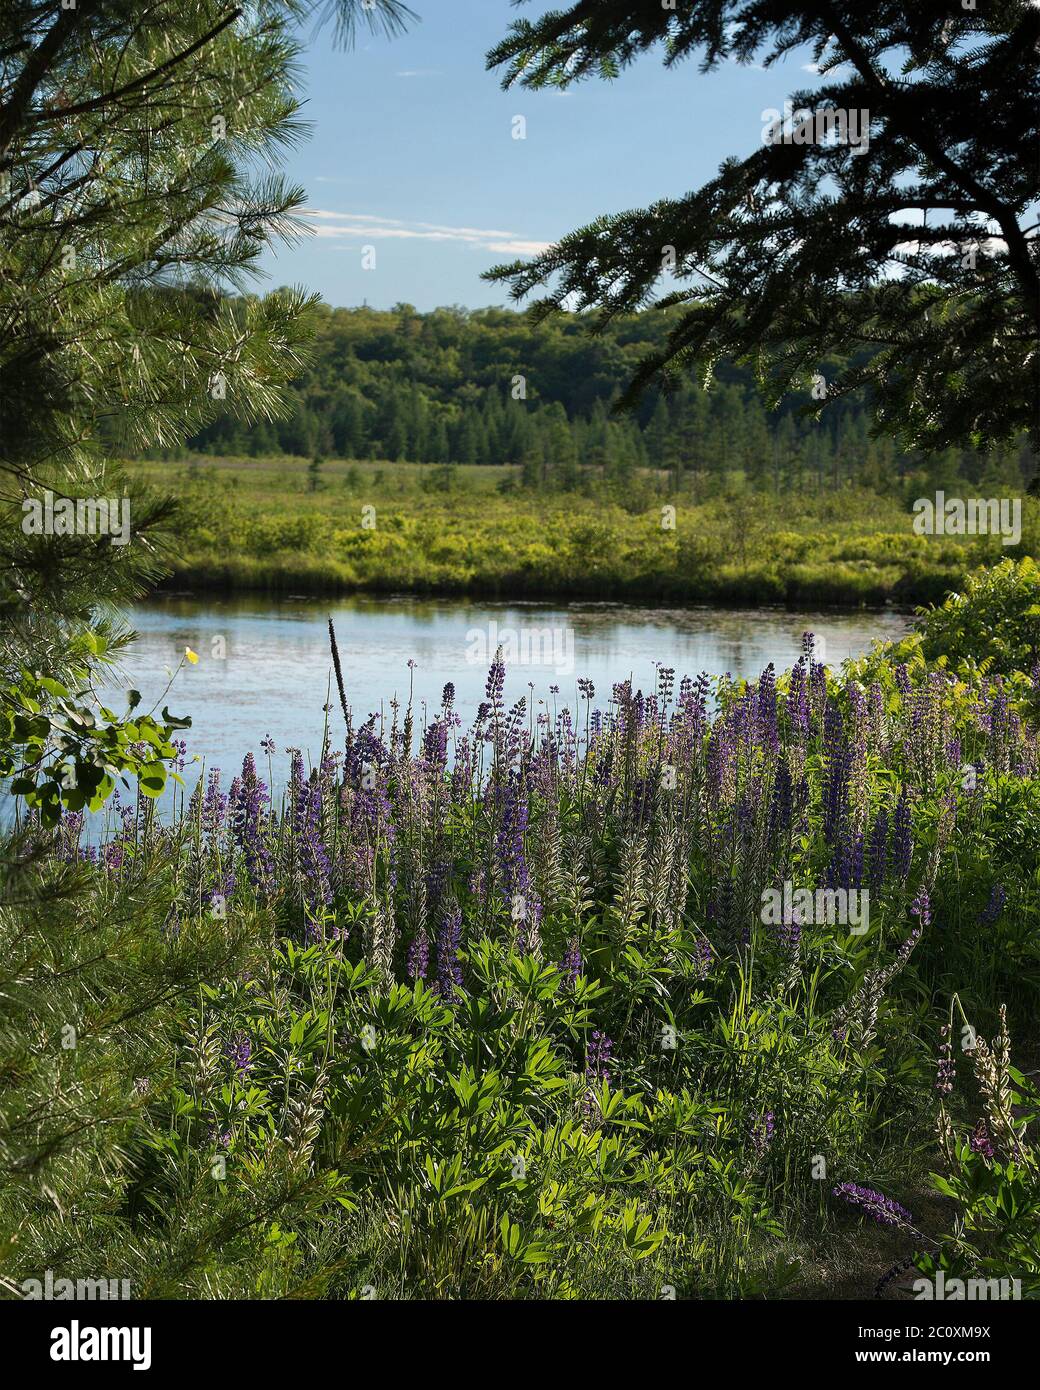 Wild Purple Lupine Flowers in the forest by a pond with trees, foliage and a blue sky and clouds in the summer scenery displaying its summer season. Stock Photo